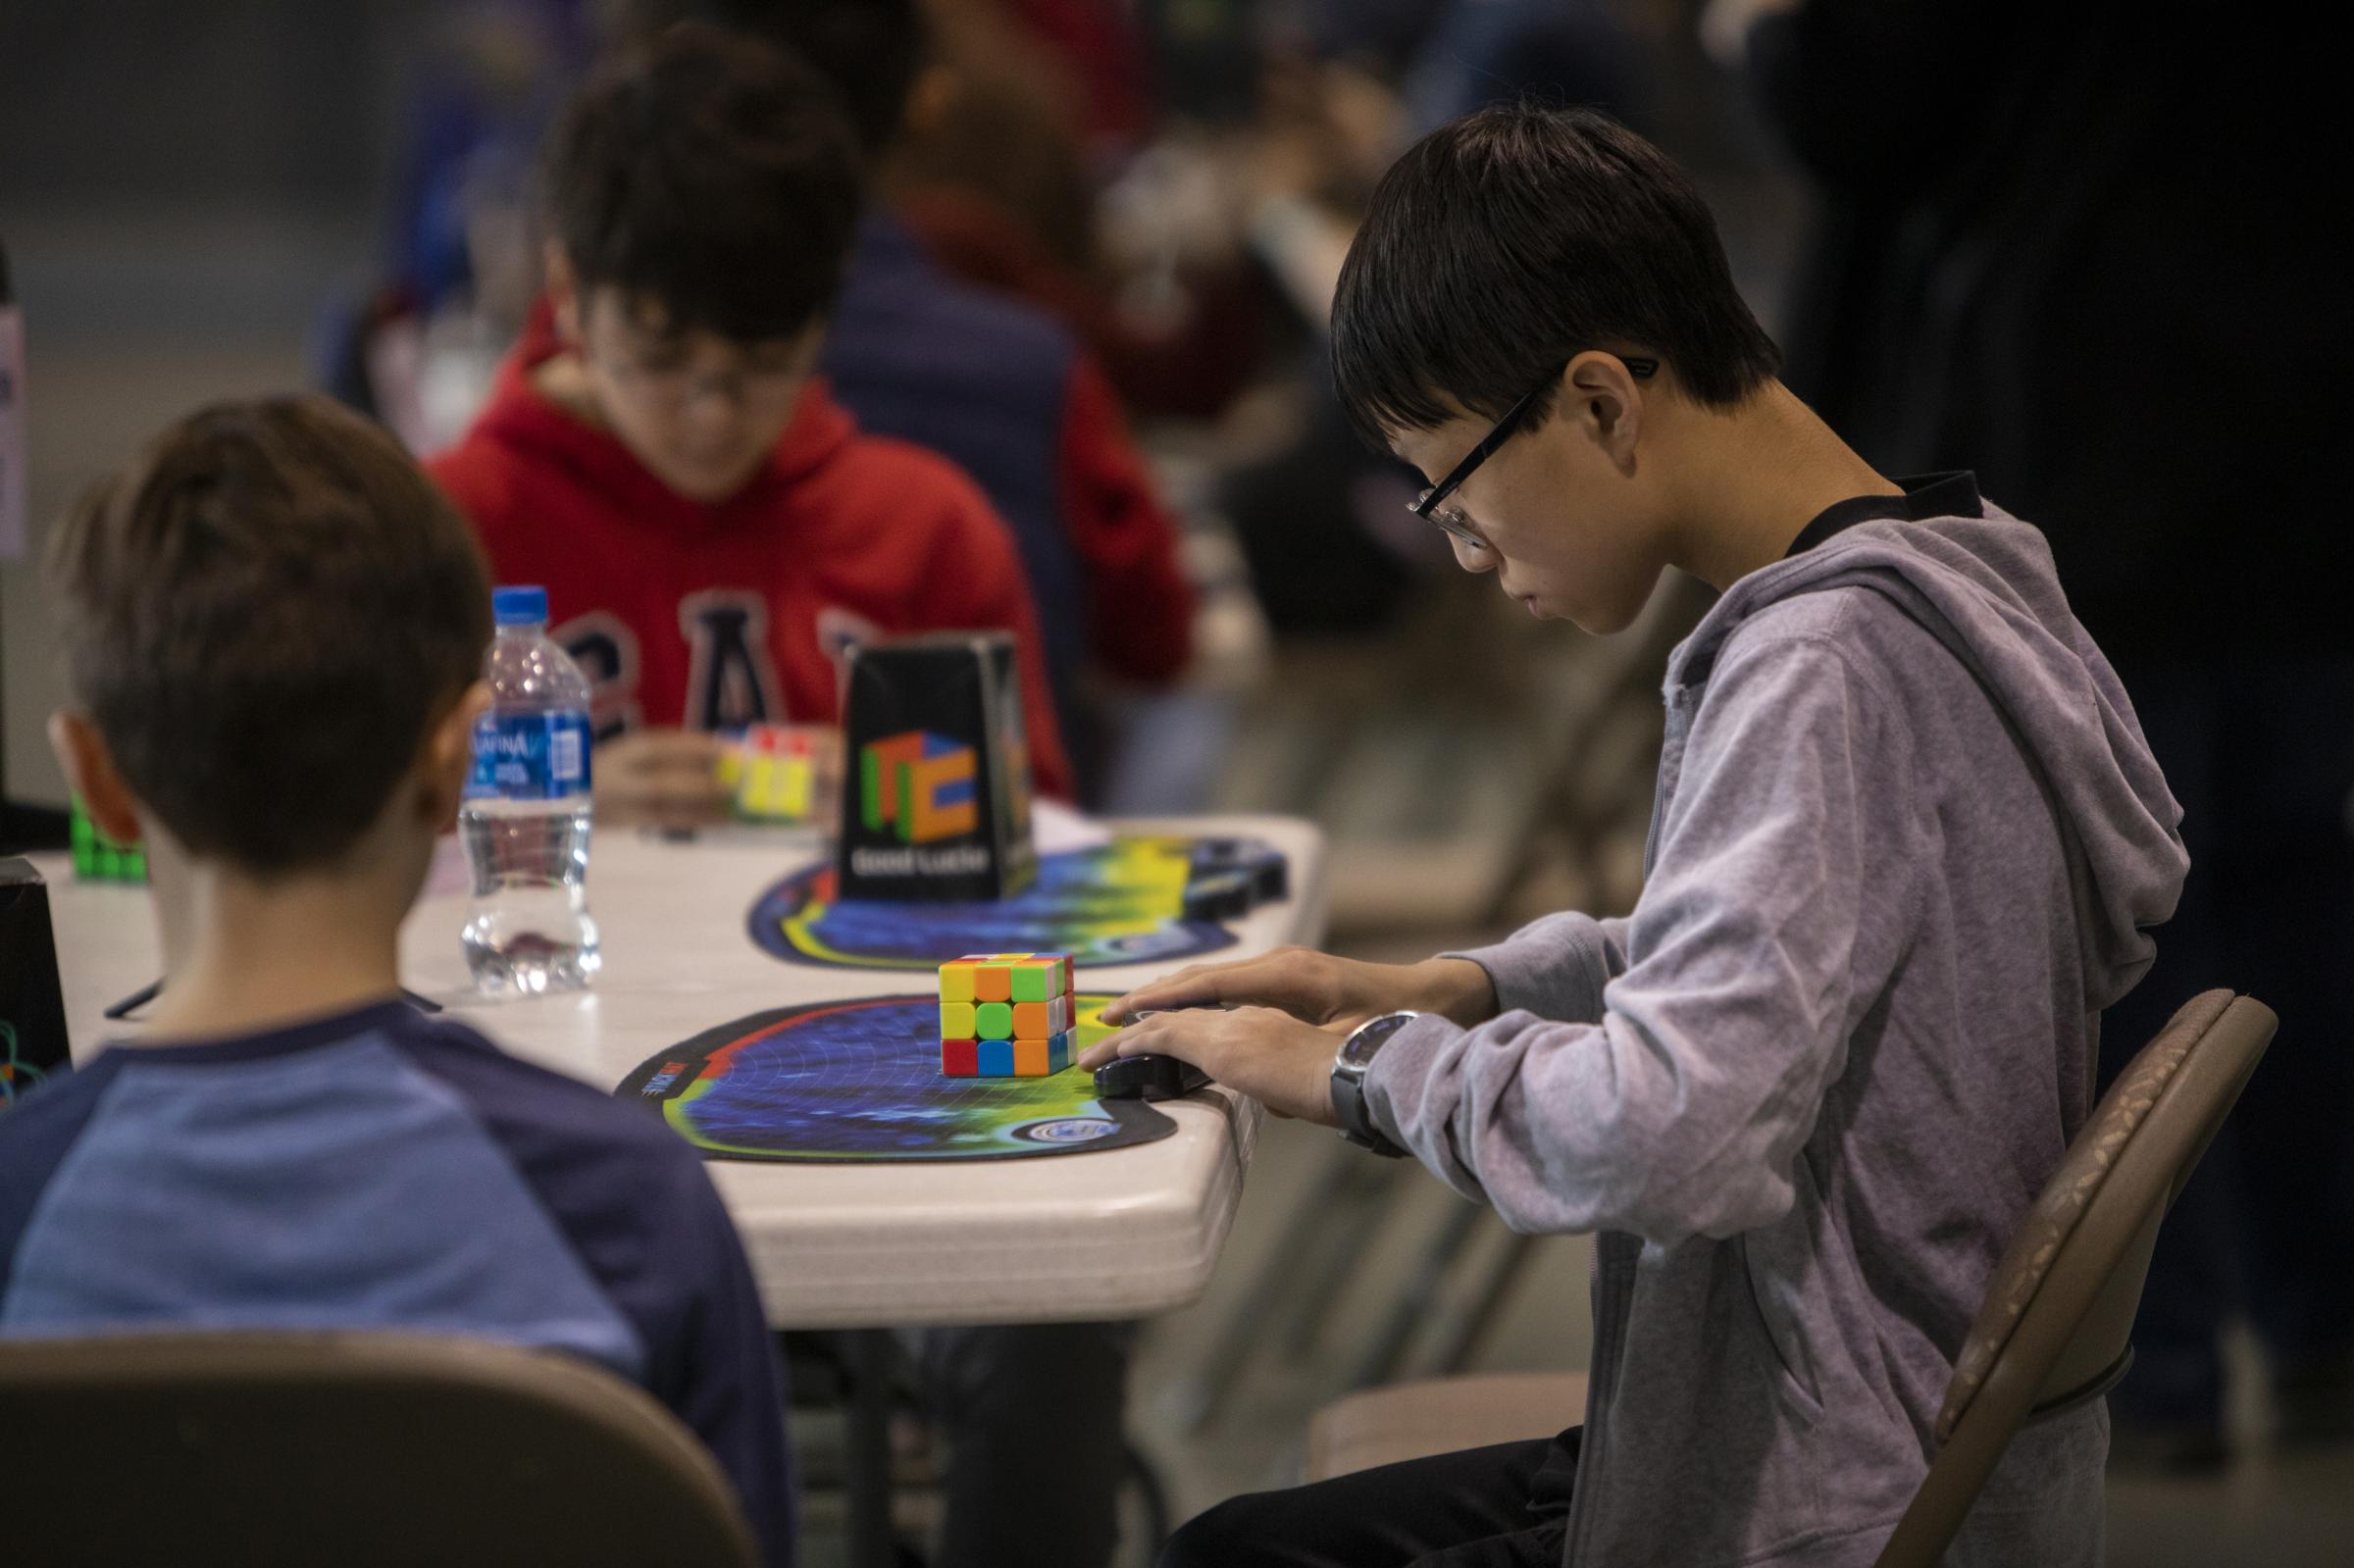 Speedcubers - Cubers start a competitive solve with their hands on the timer. Once their hands are lifted, the...